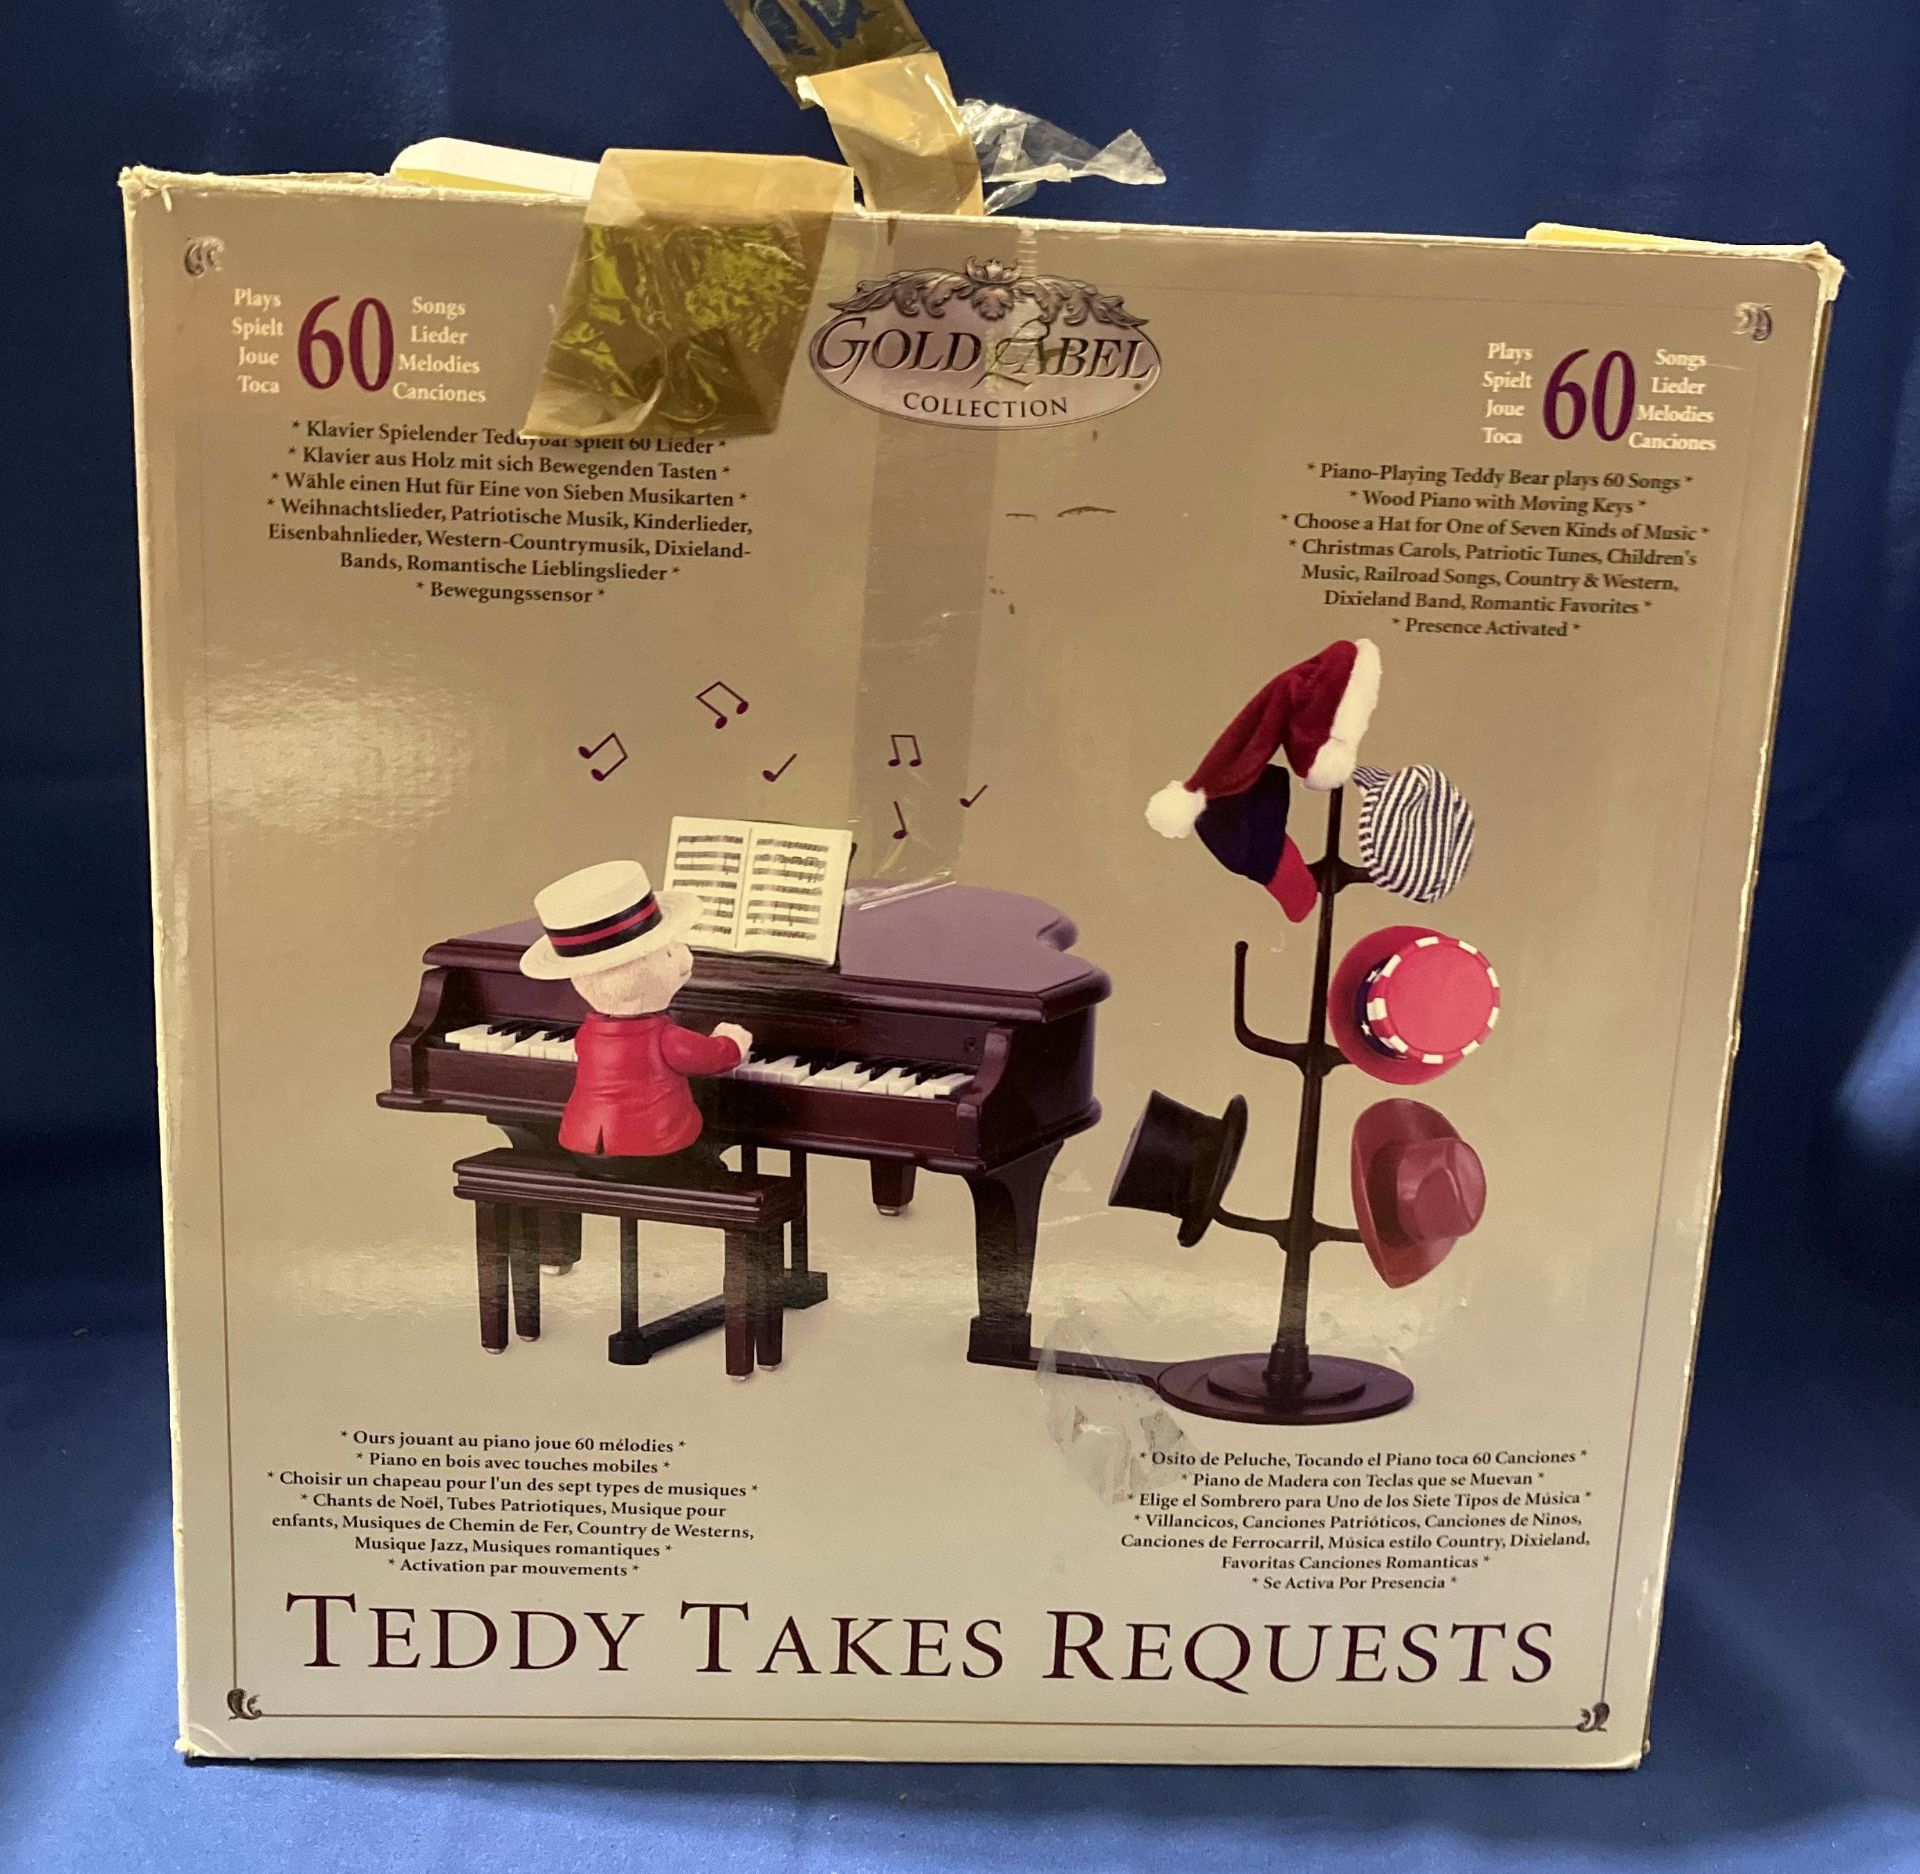 "Teddy Takes Quest" with baby grand piano by Gold Label Collection a Musical and Action with seven - Image 2 of 2